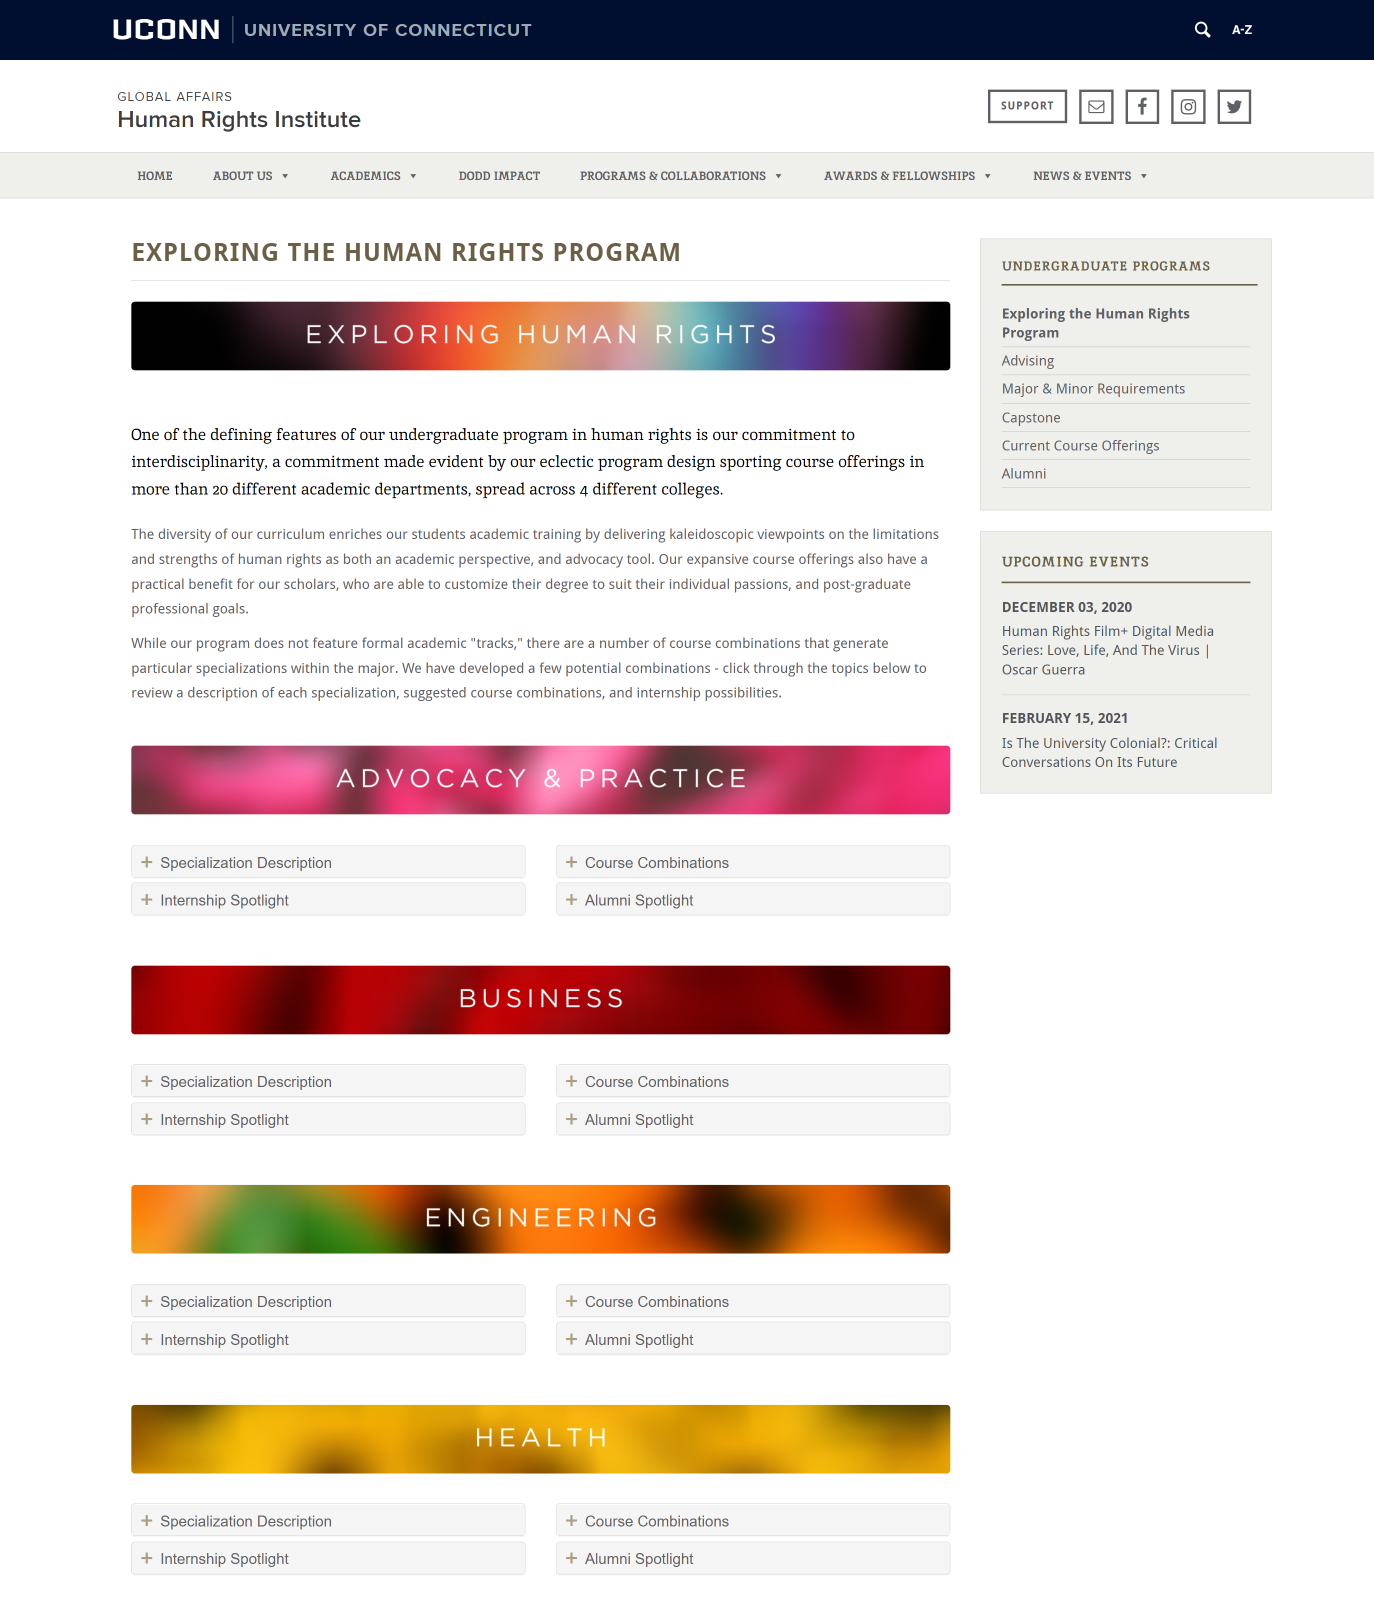 Screenshot of an interior page of the Human Rights Institute website